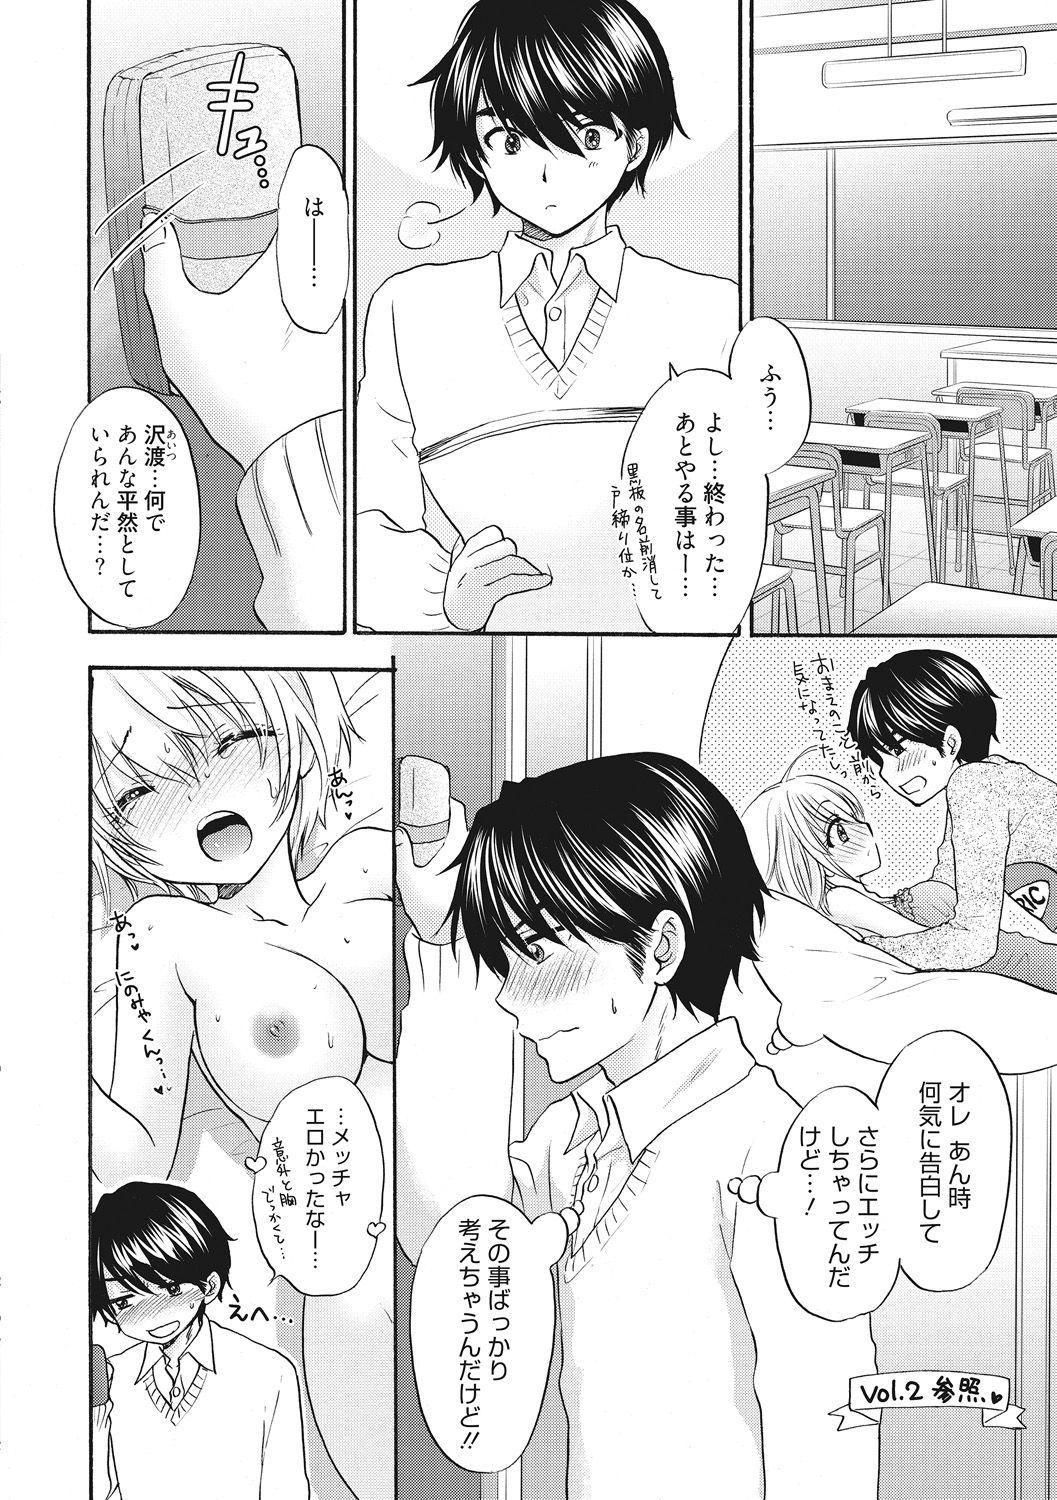 Skinny Houkago Love Mode 13 Blowjob - Page 2